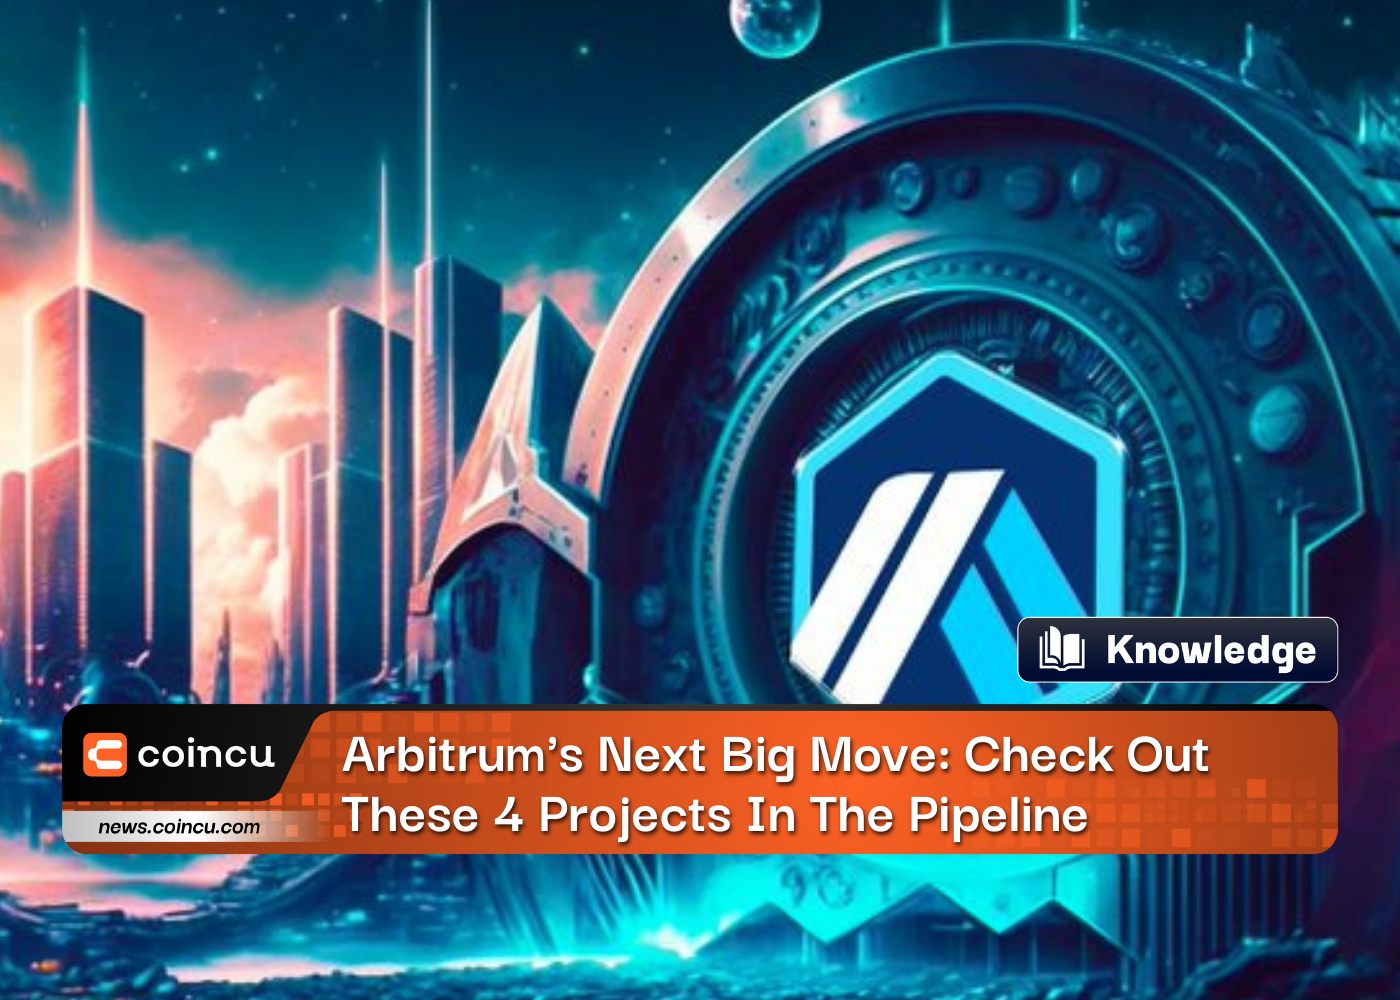 Arbitrum's Next Big Move: Check Out These 4 Projects In The Pipeline